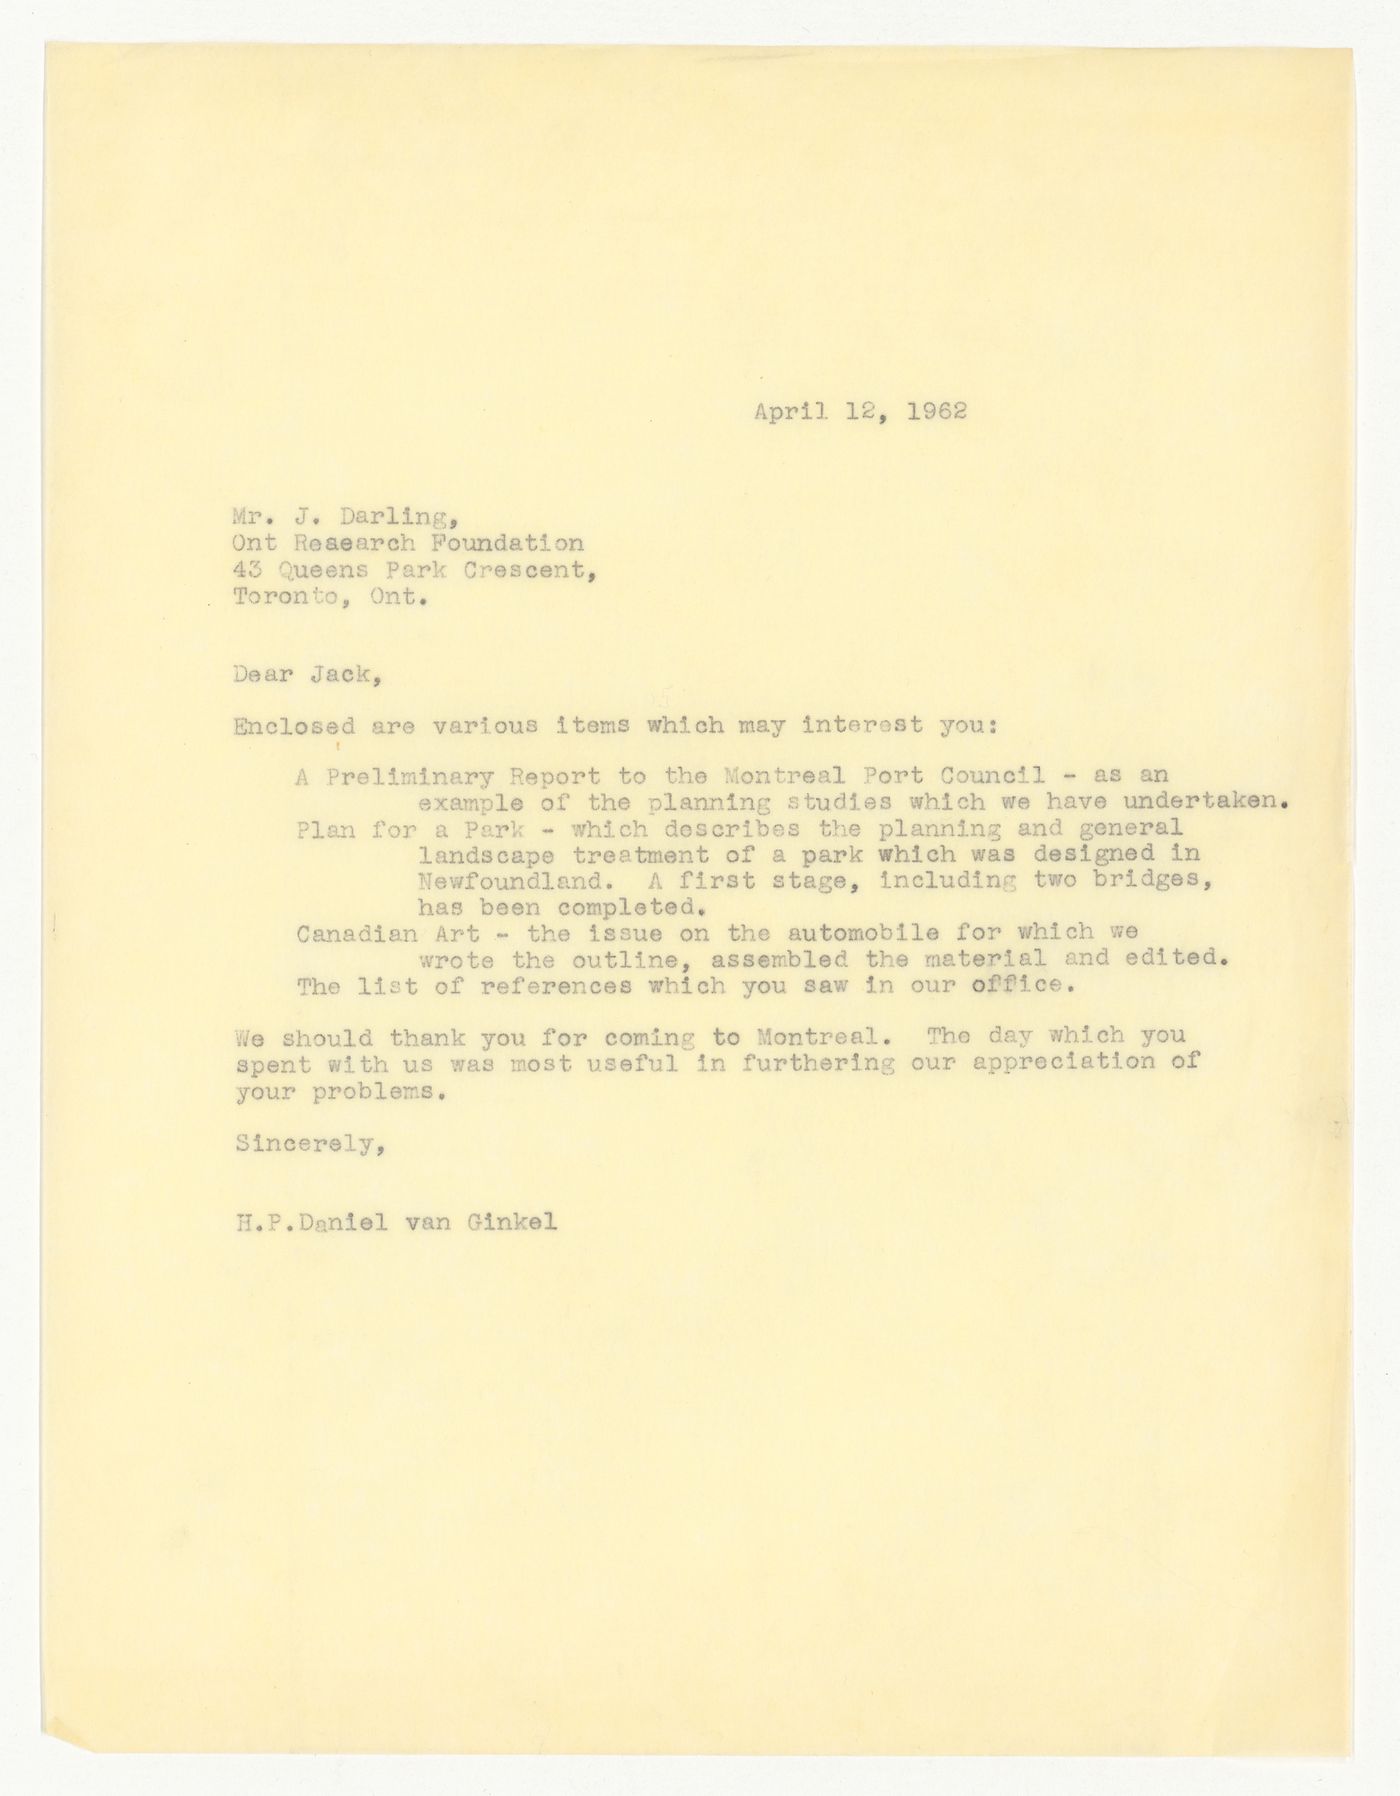 Letter from H. P. Daniel van Ginkel to Jack Darling for Ontario Research Foundation, Meadowvale, Ontario